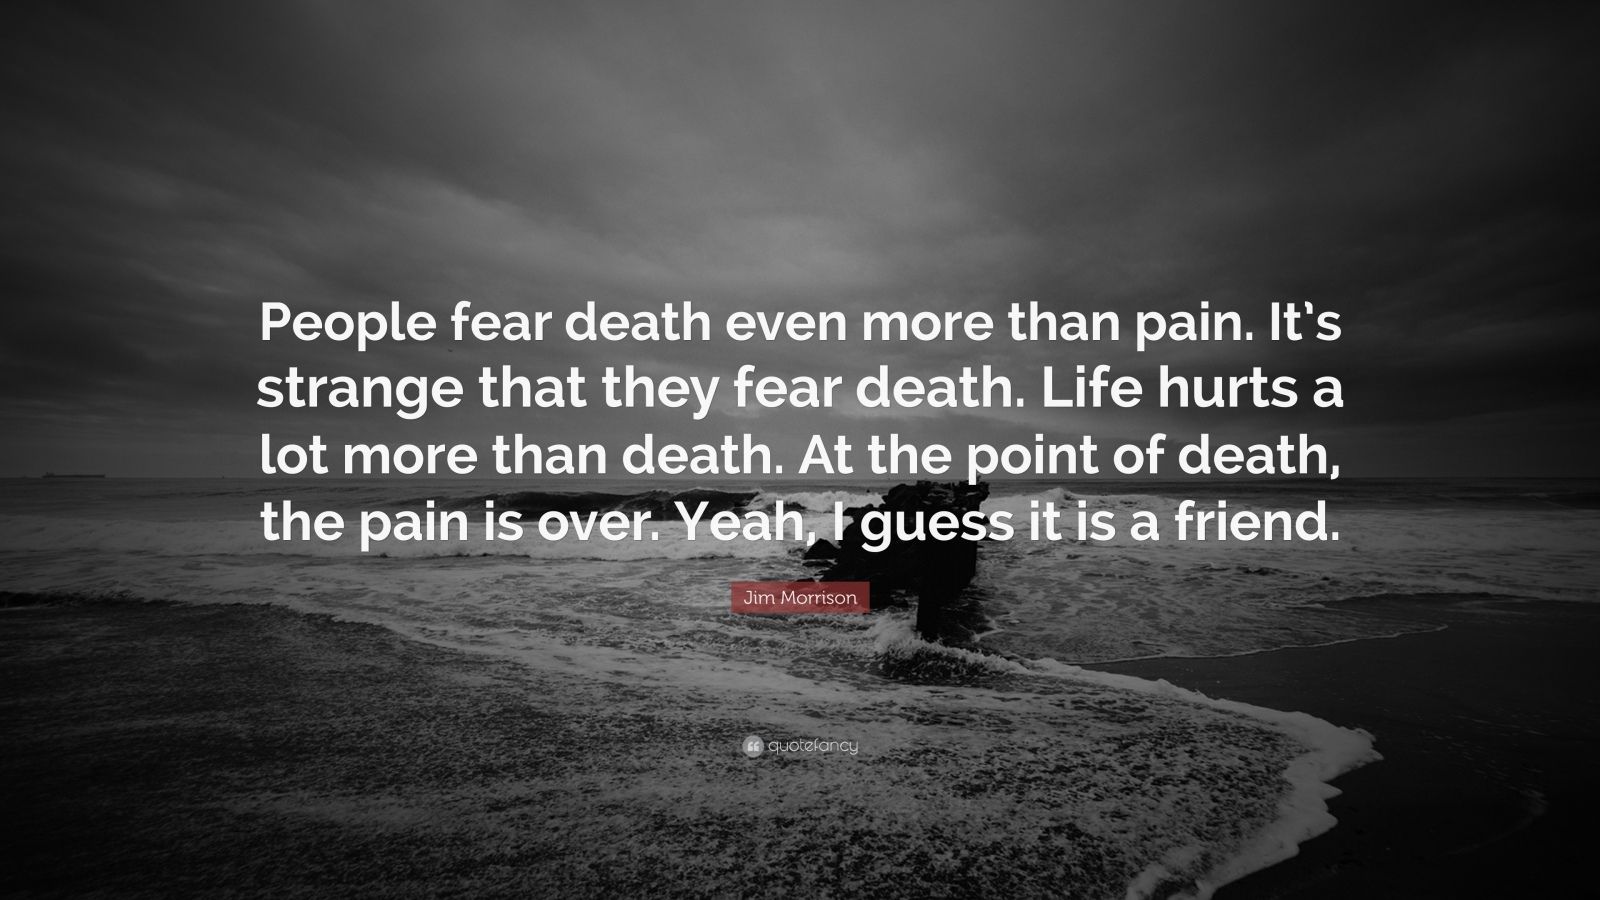 Jim Morrison Quote: “People fear death even more than pain. It’s